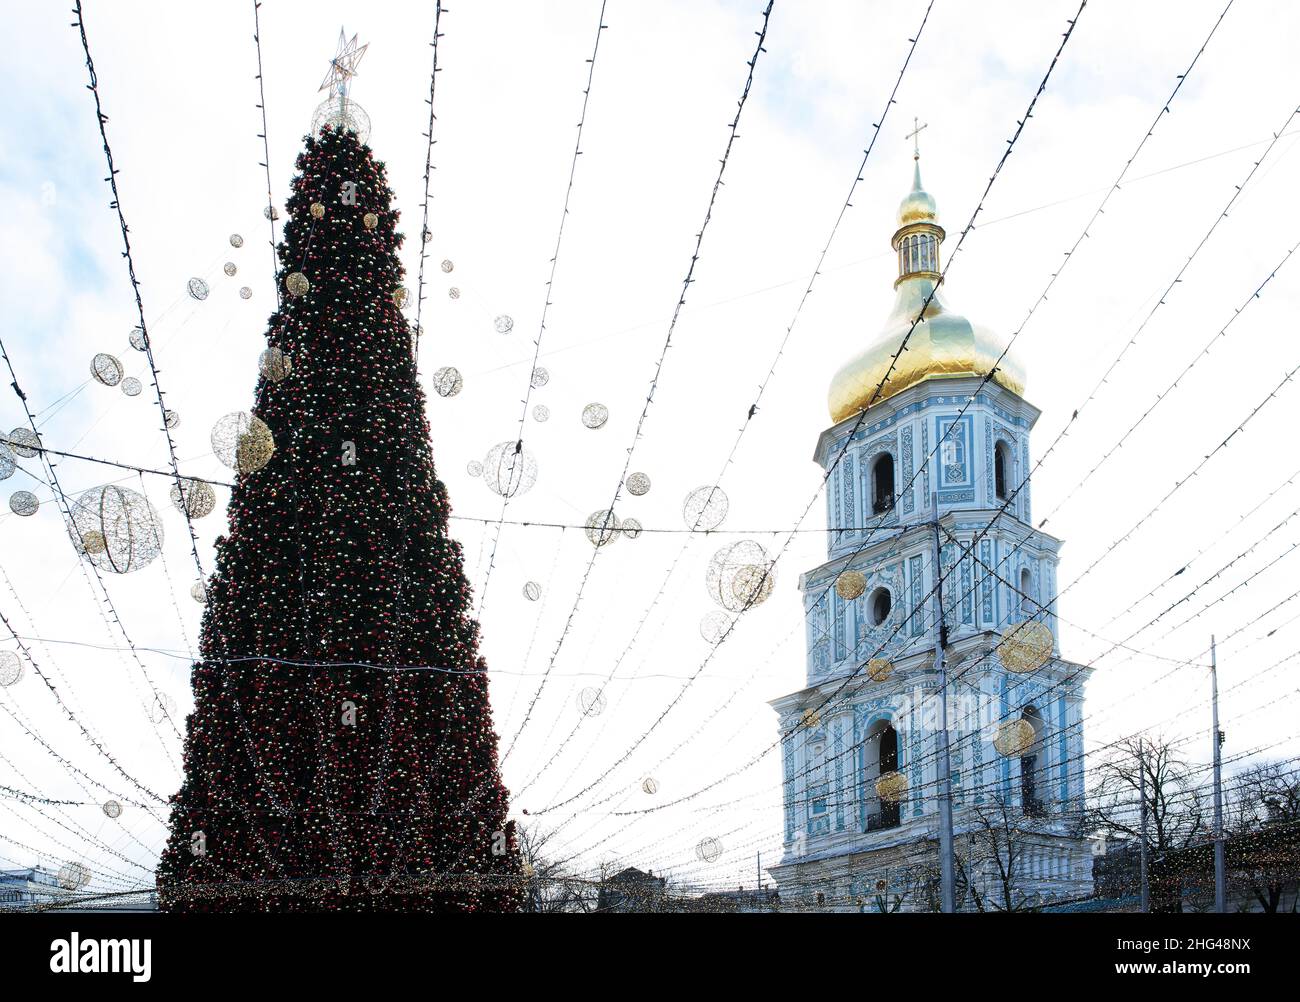 A Christmas tree is installed on Sophia Square in Kiev, Ukraine. In the background - the bell tower of the Cathedral of St. Sophia of Kiev - the sight Stock Photo